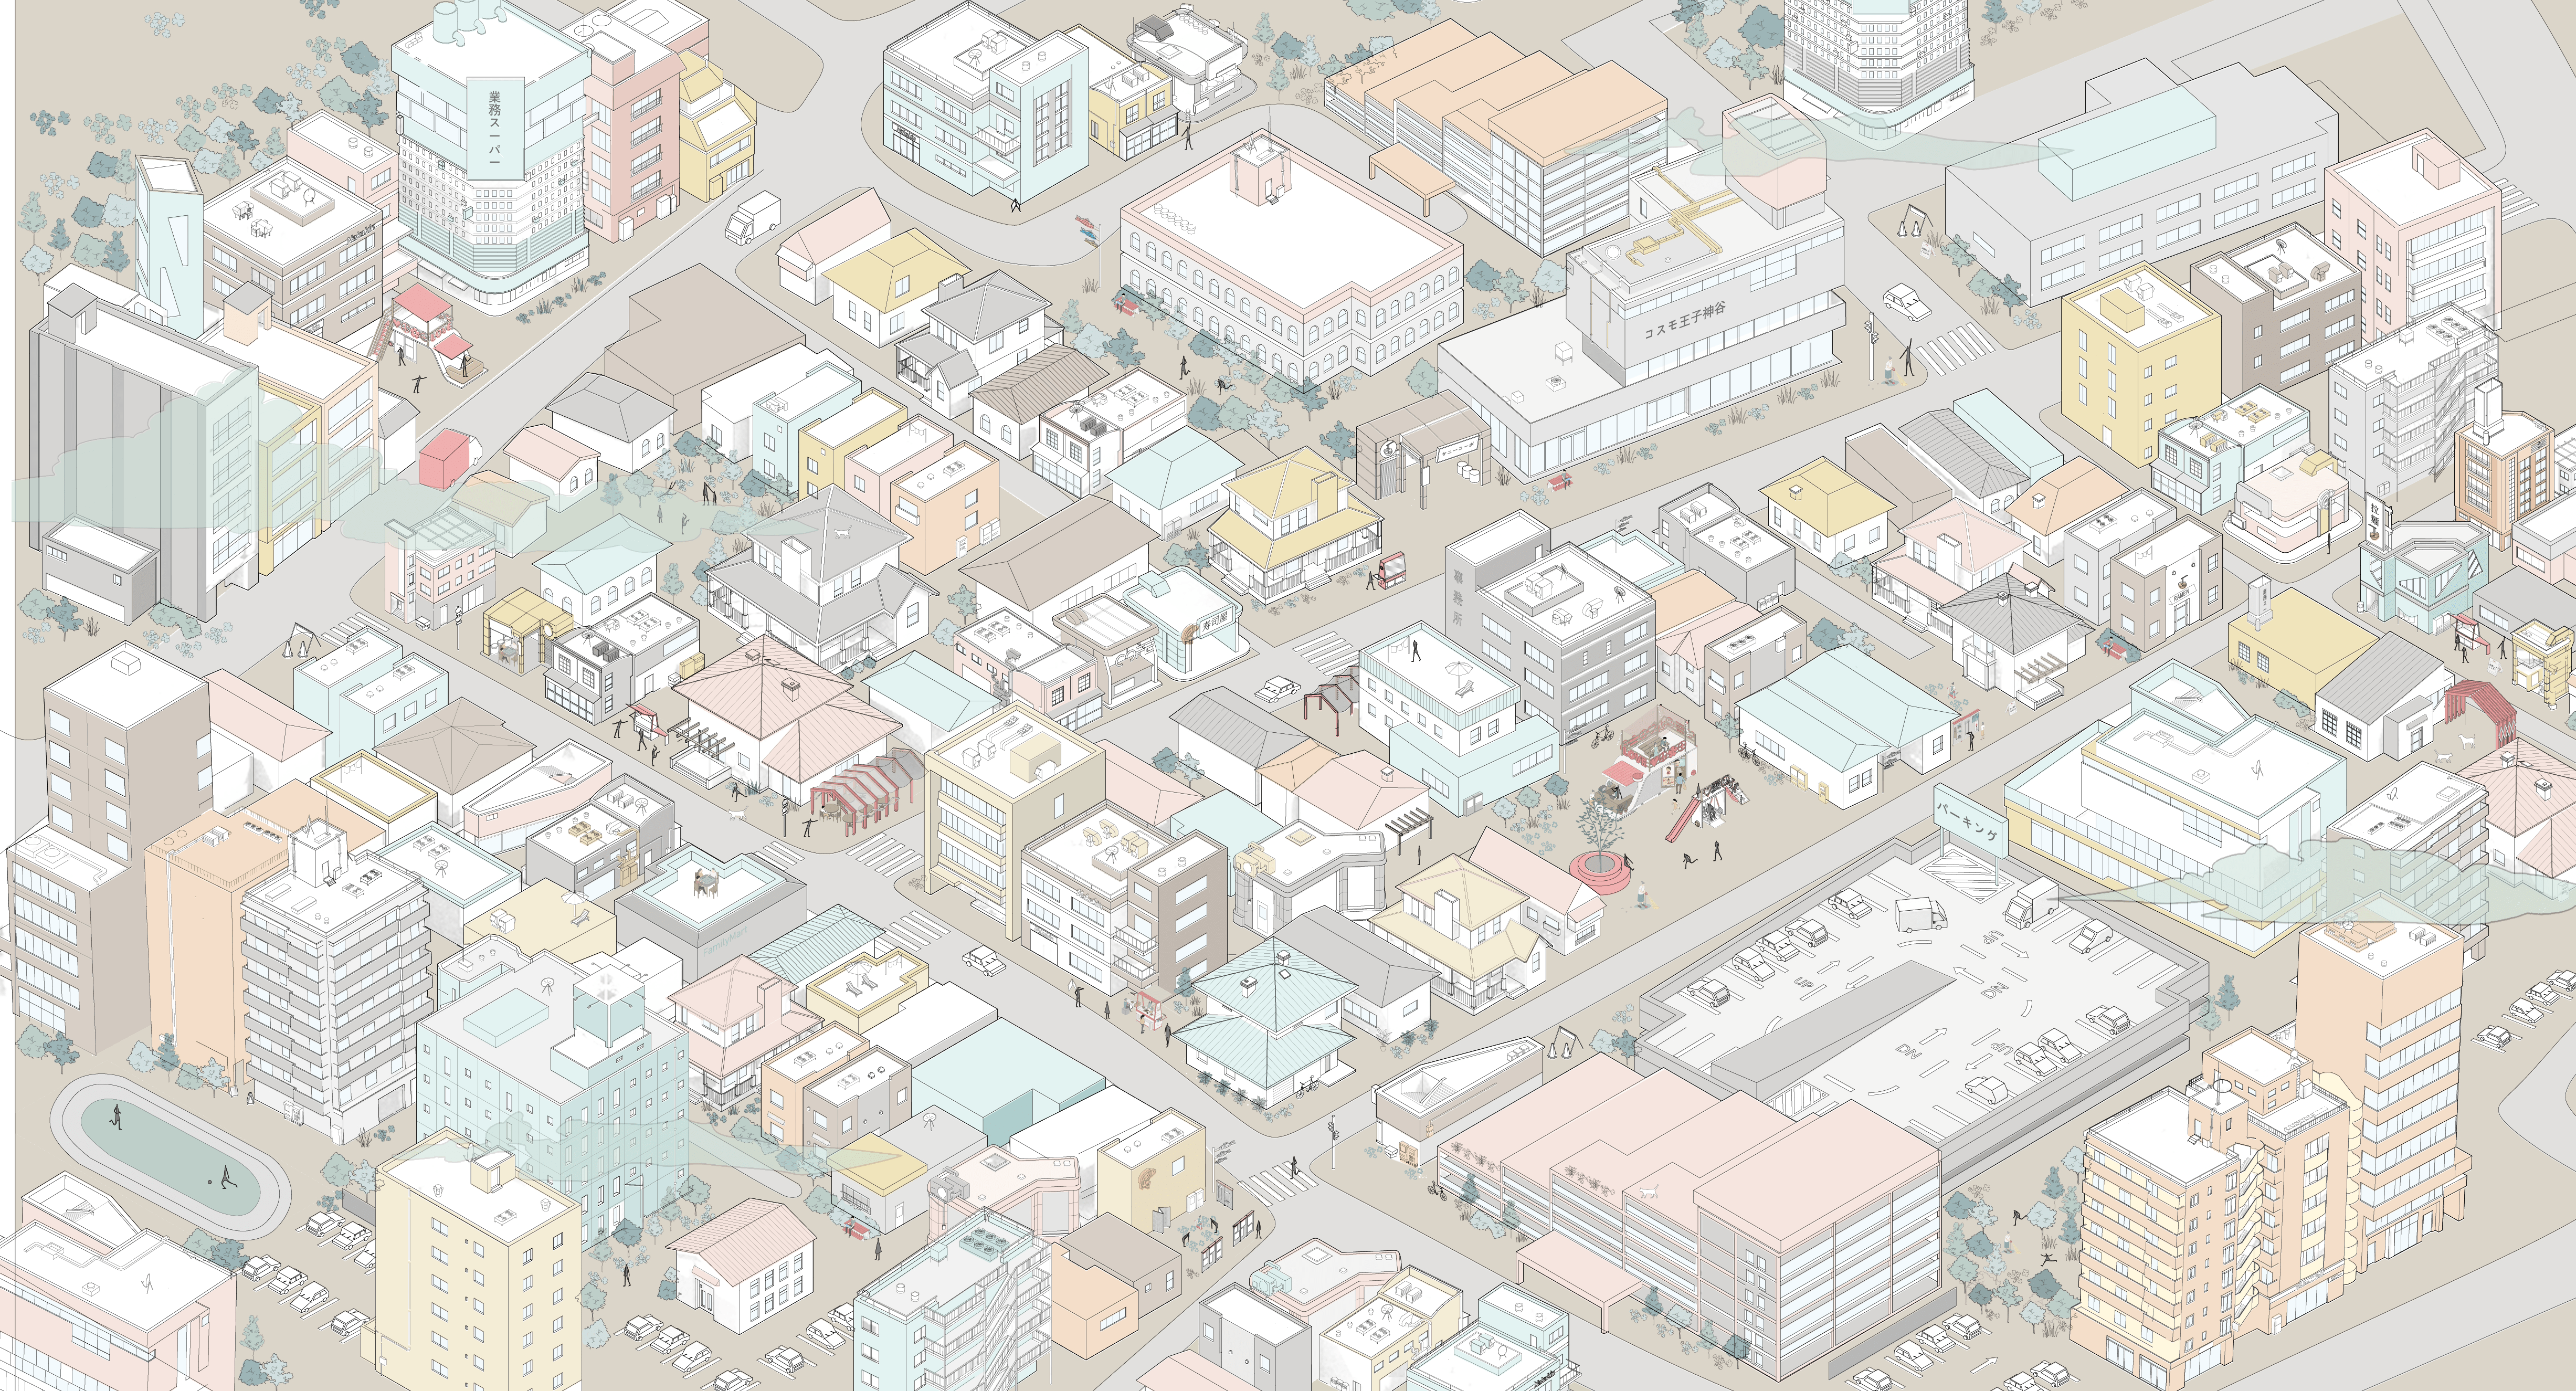 The Project: Isometric view of Kita city neighborhood with proposed design